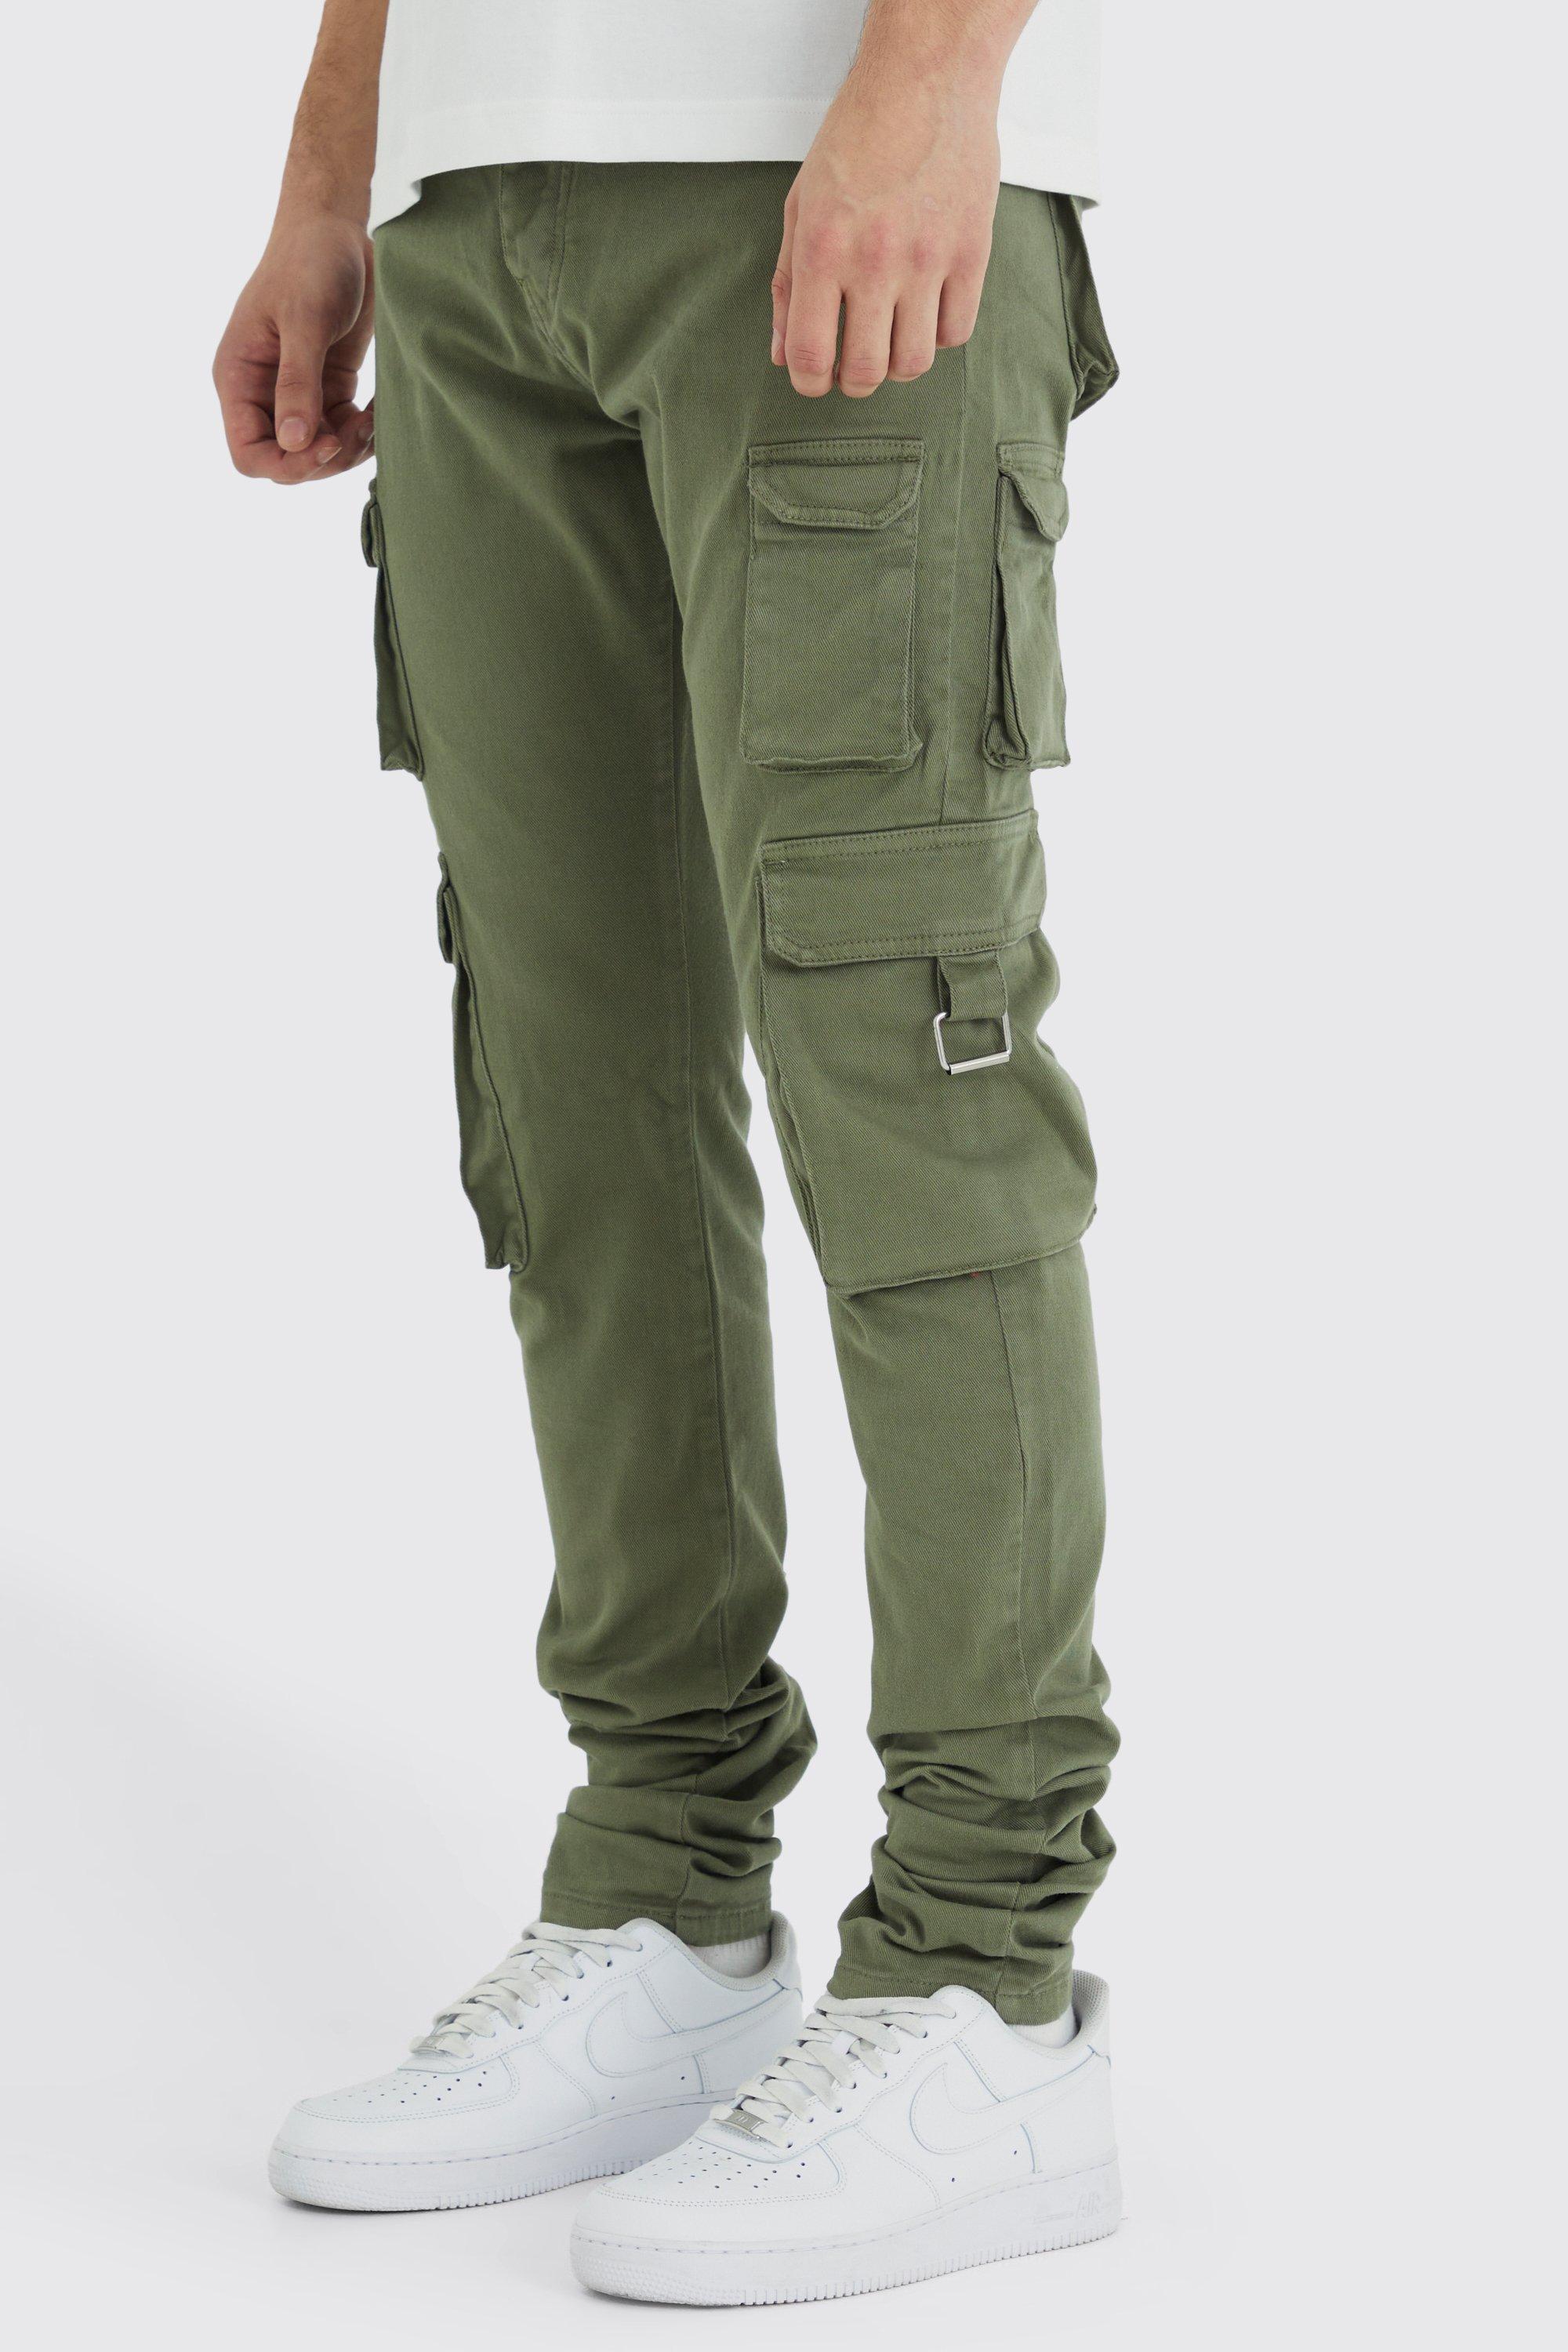 XFLWAM Men's Cargo Cargo Lightweight Work Pants Hiking Ripstop Cargo Pants  Relaxed Fit Mens Cargo Pant-Reg and Big and Tall Sizes Gray XL - Walmart.com